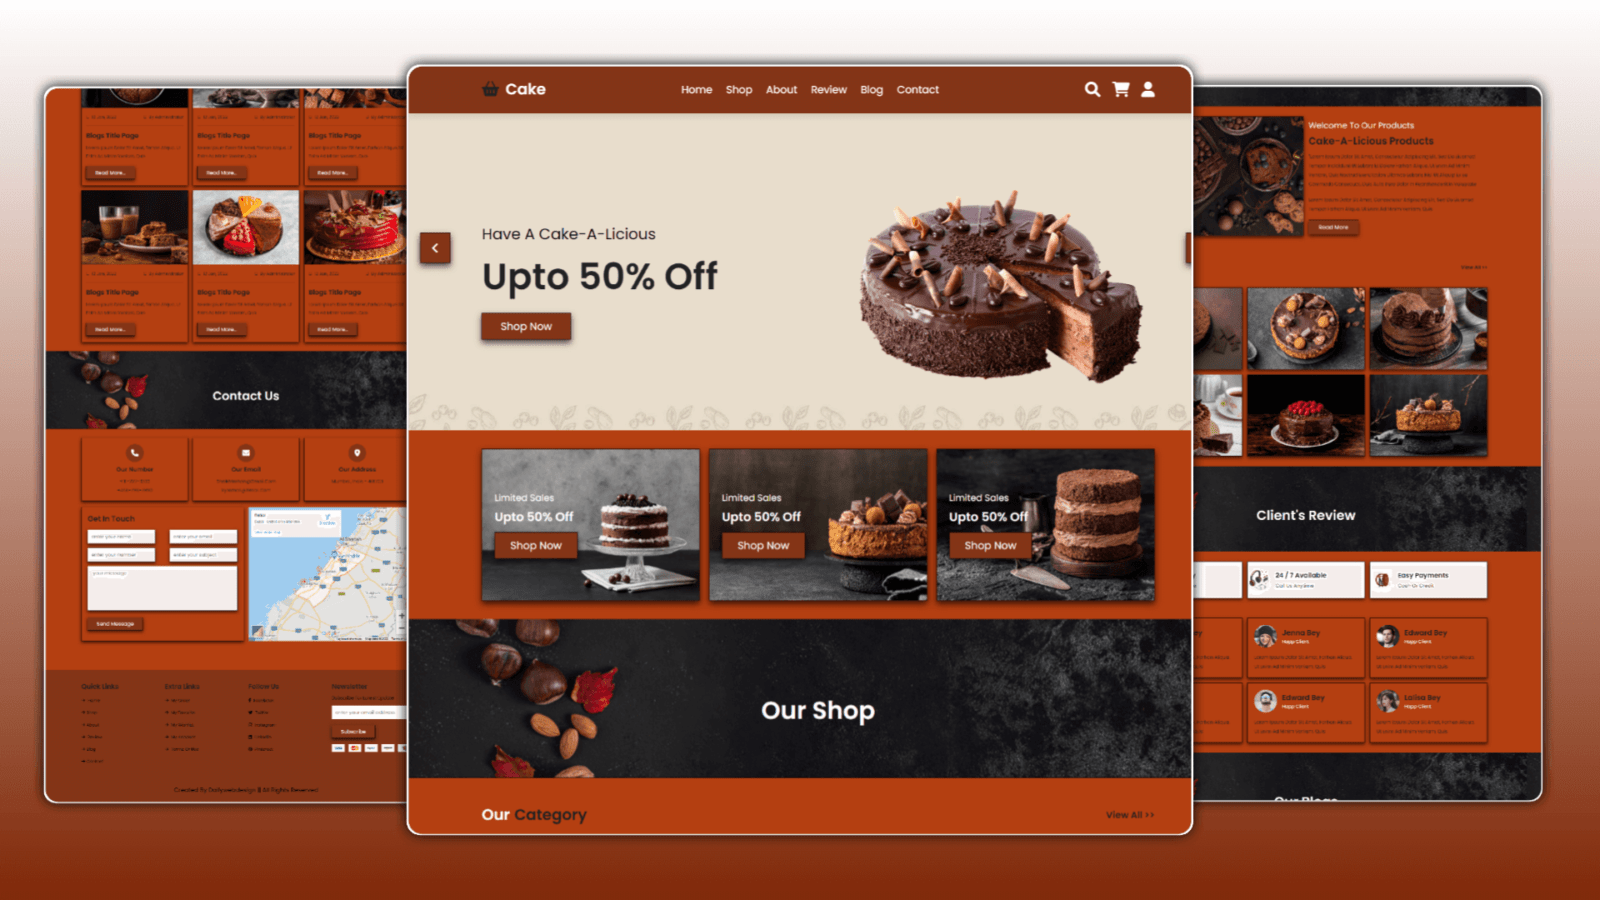 Online Cake Shop Website Design Using HTML CSS And JAVASCRIPT With Source Code